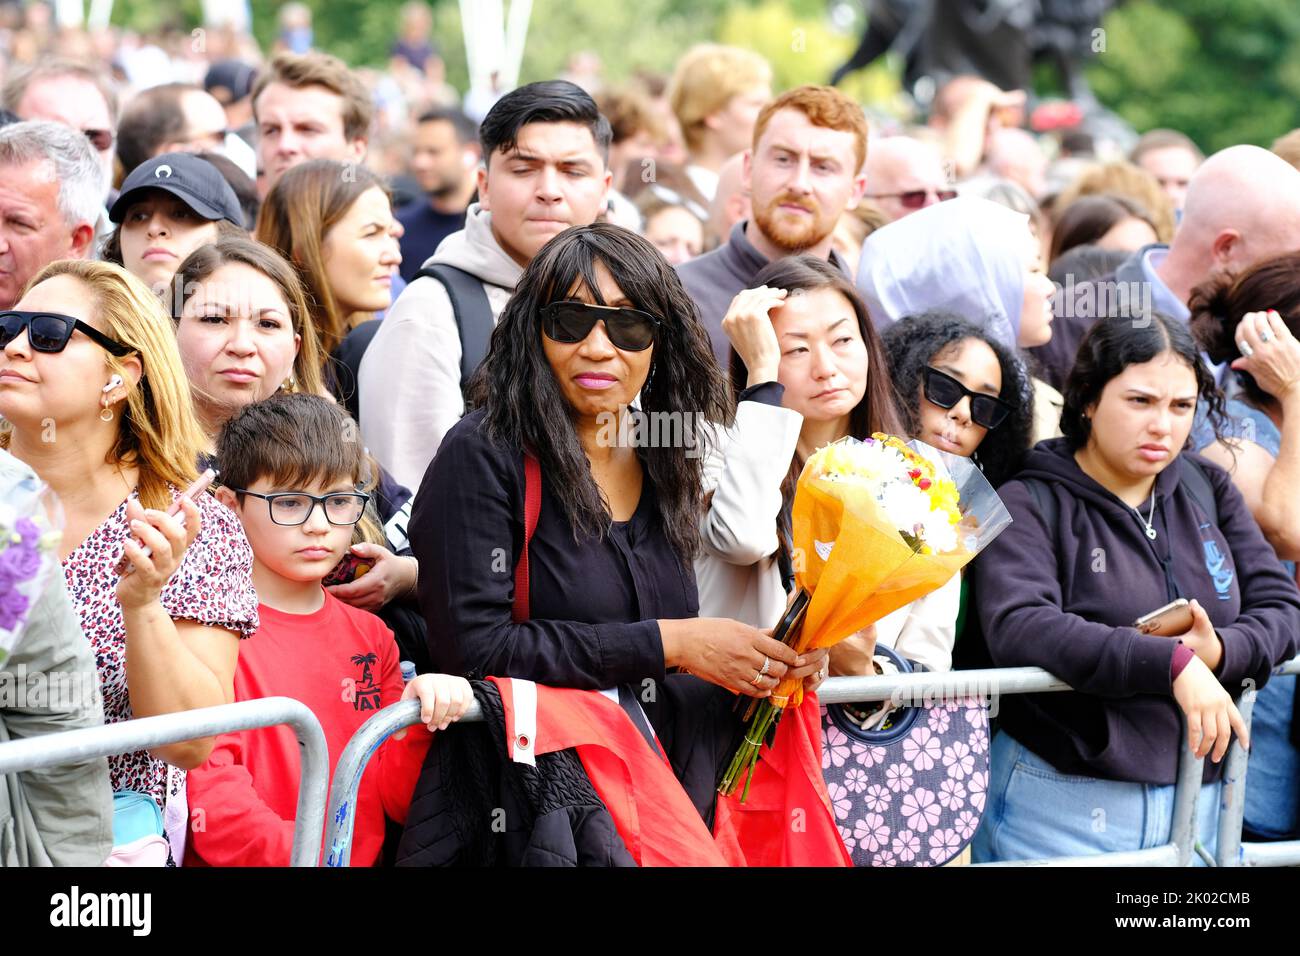 Buckingham Palace, London, UK – Friday 9th September 2022 – Large crowds gather with flowers outside Buckingham Palace to mourn the death of Queen Elizabeth II yesterday. Photo Steven May / Alamy Live News Stock Photo